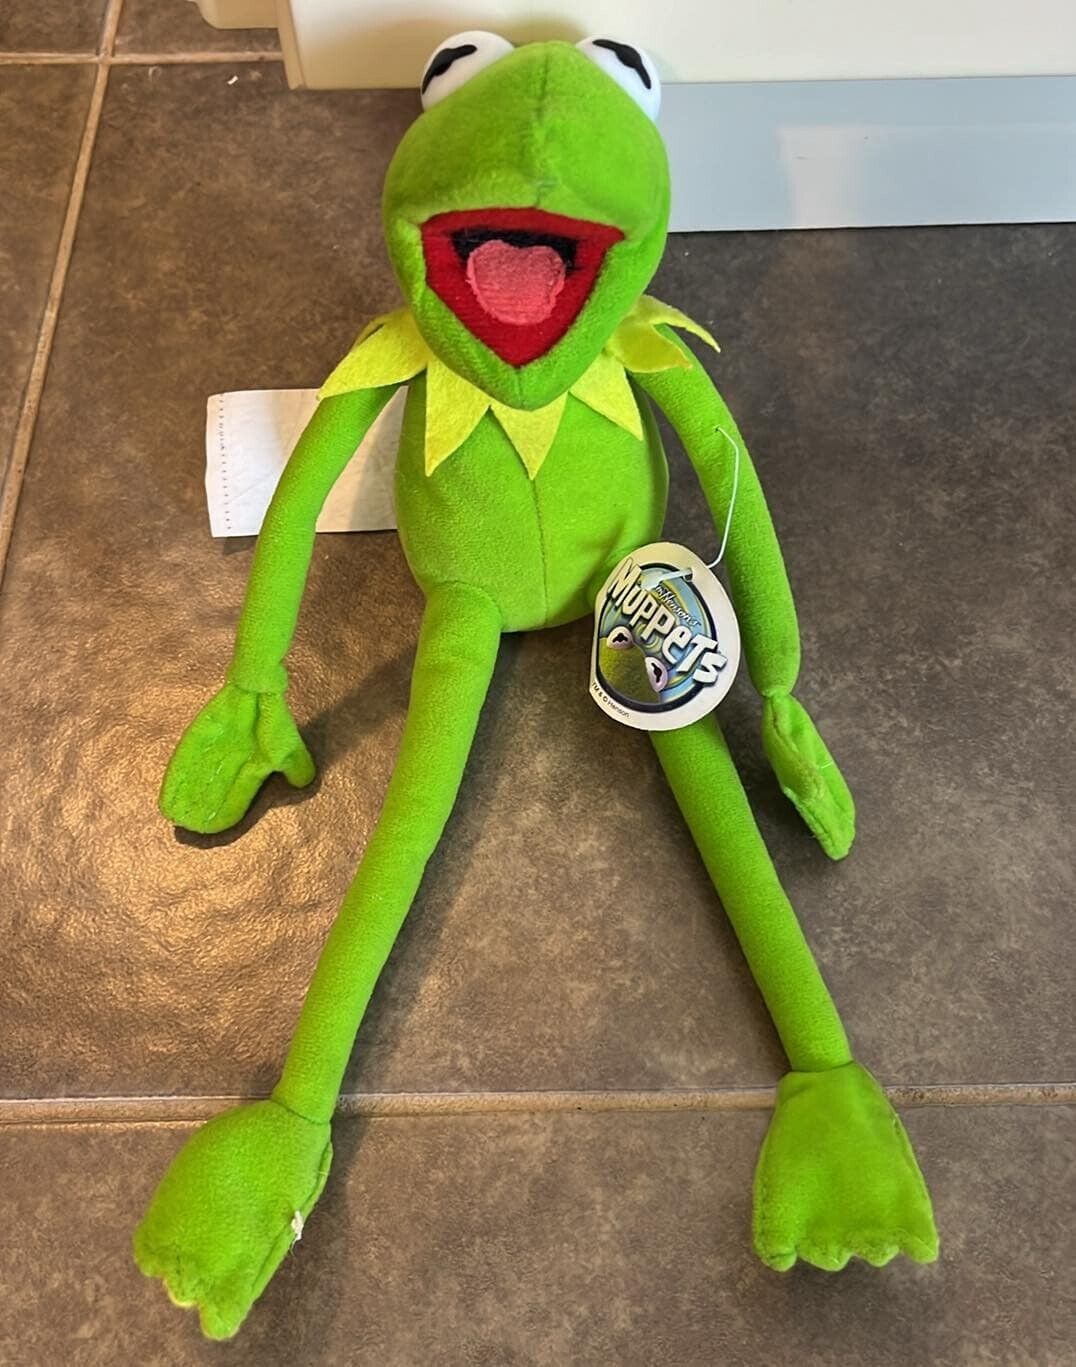 Vintage The Muppets Kermit The Frog Plush Toy 10 inches